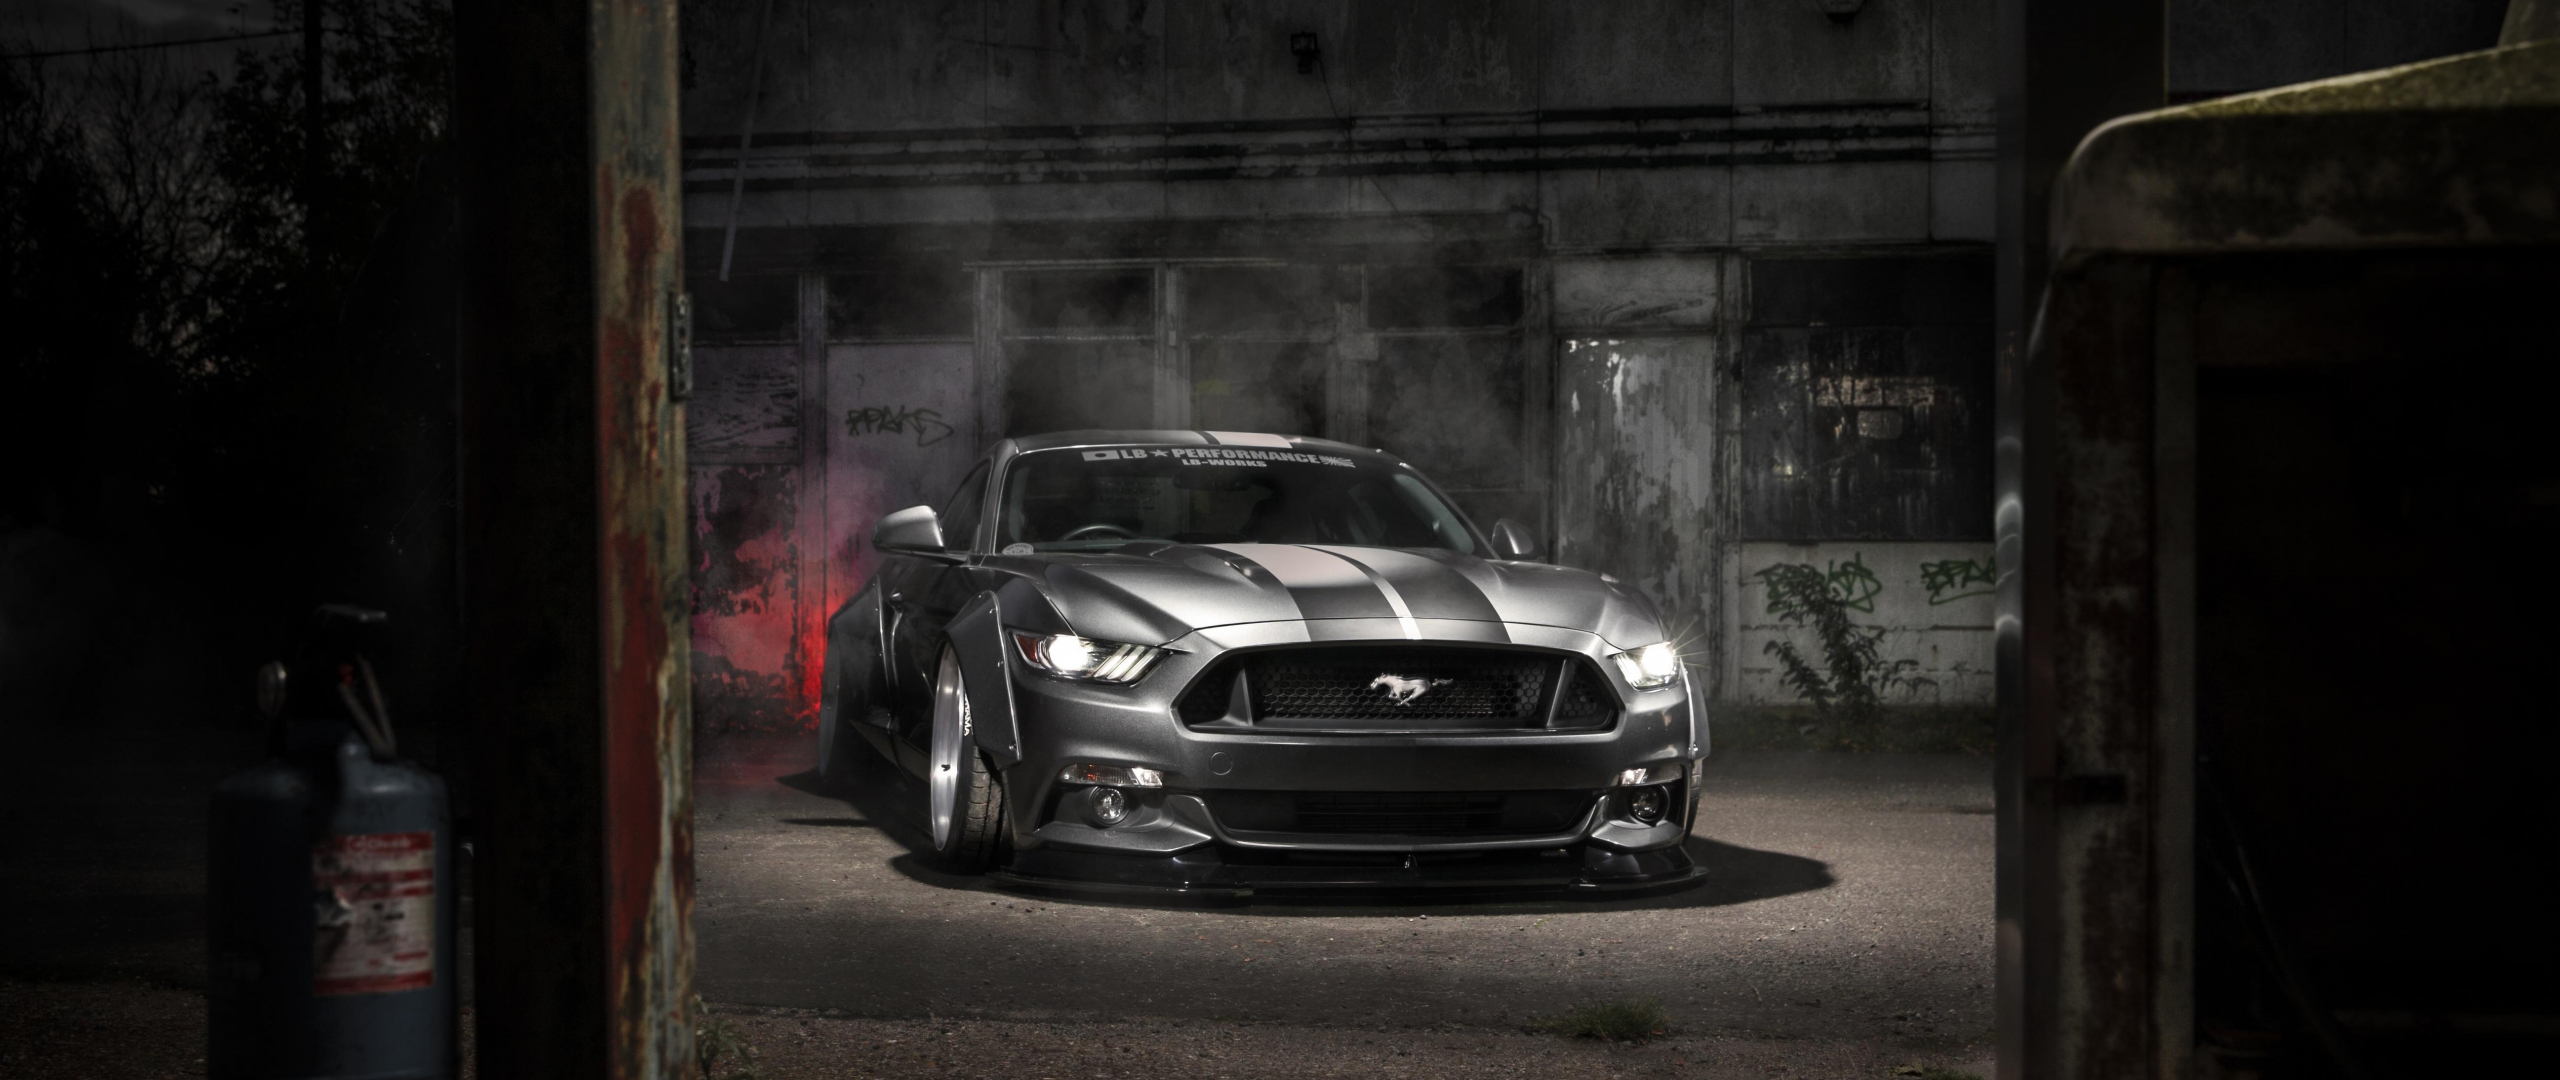 Download 2560x1080 Wallpaper Mustang Ford Silver Muscle Car Dual Wide Widescreen 2560x1080 Hd Image Background 20623